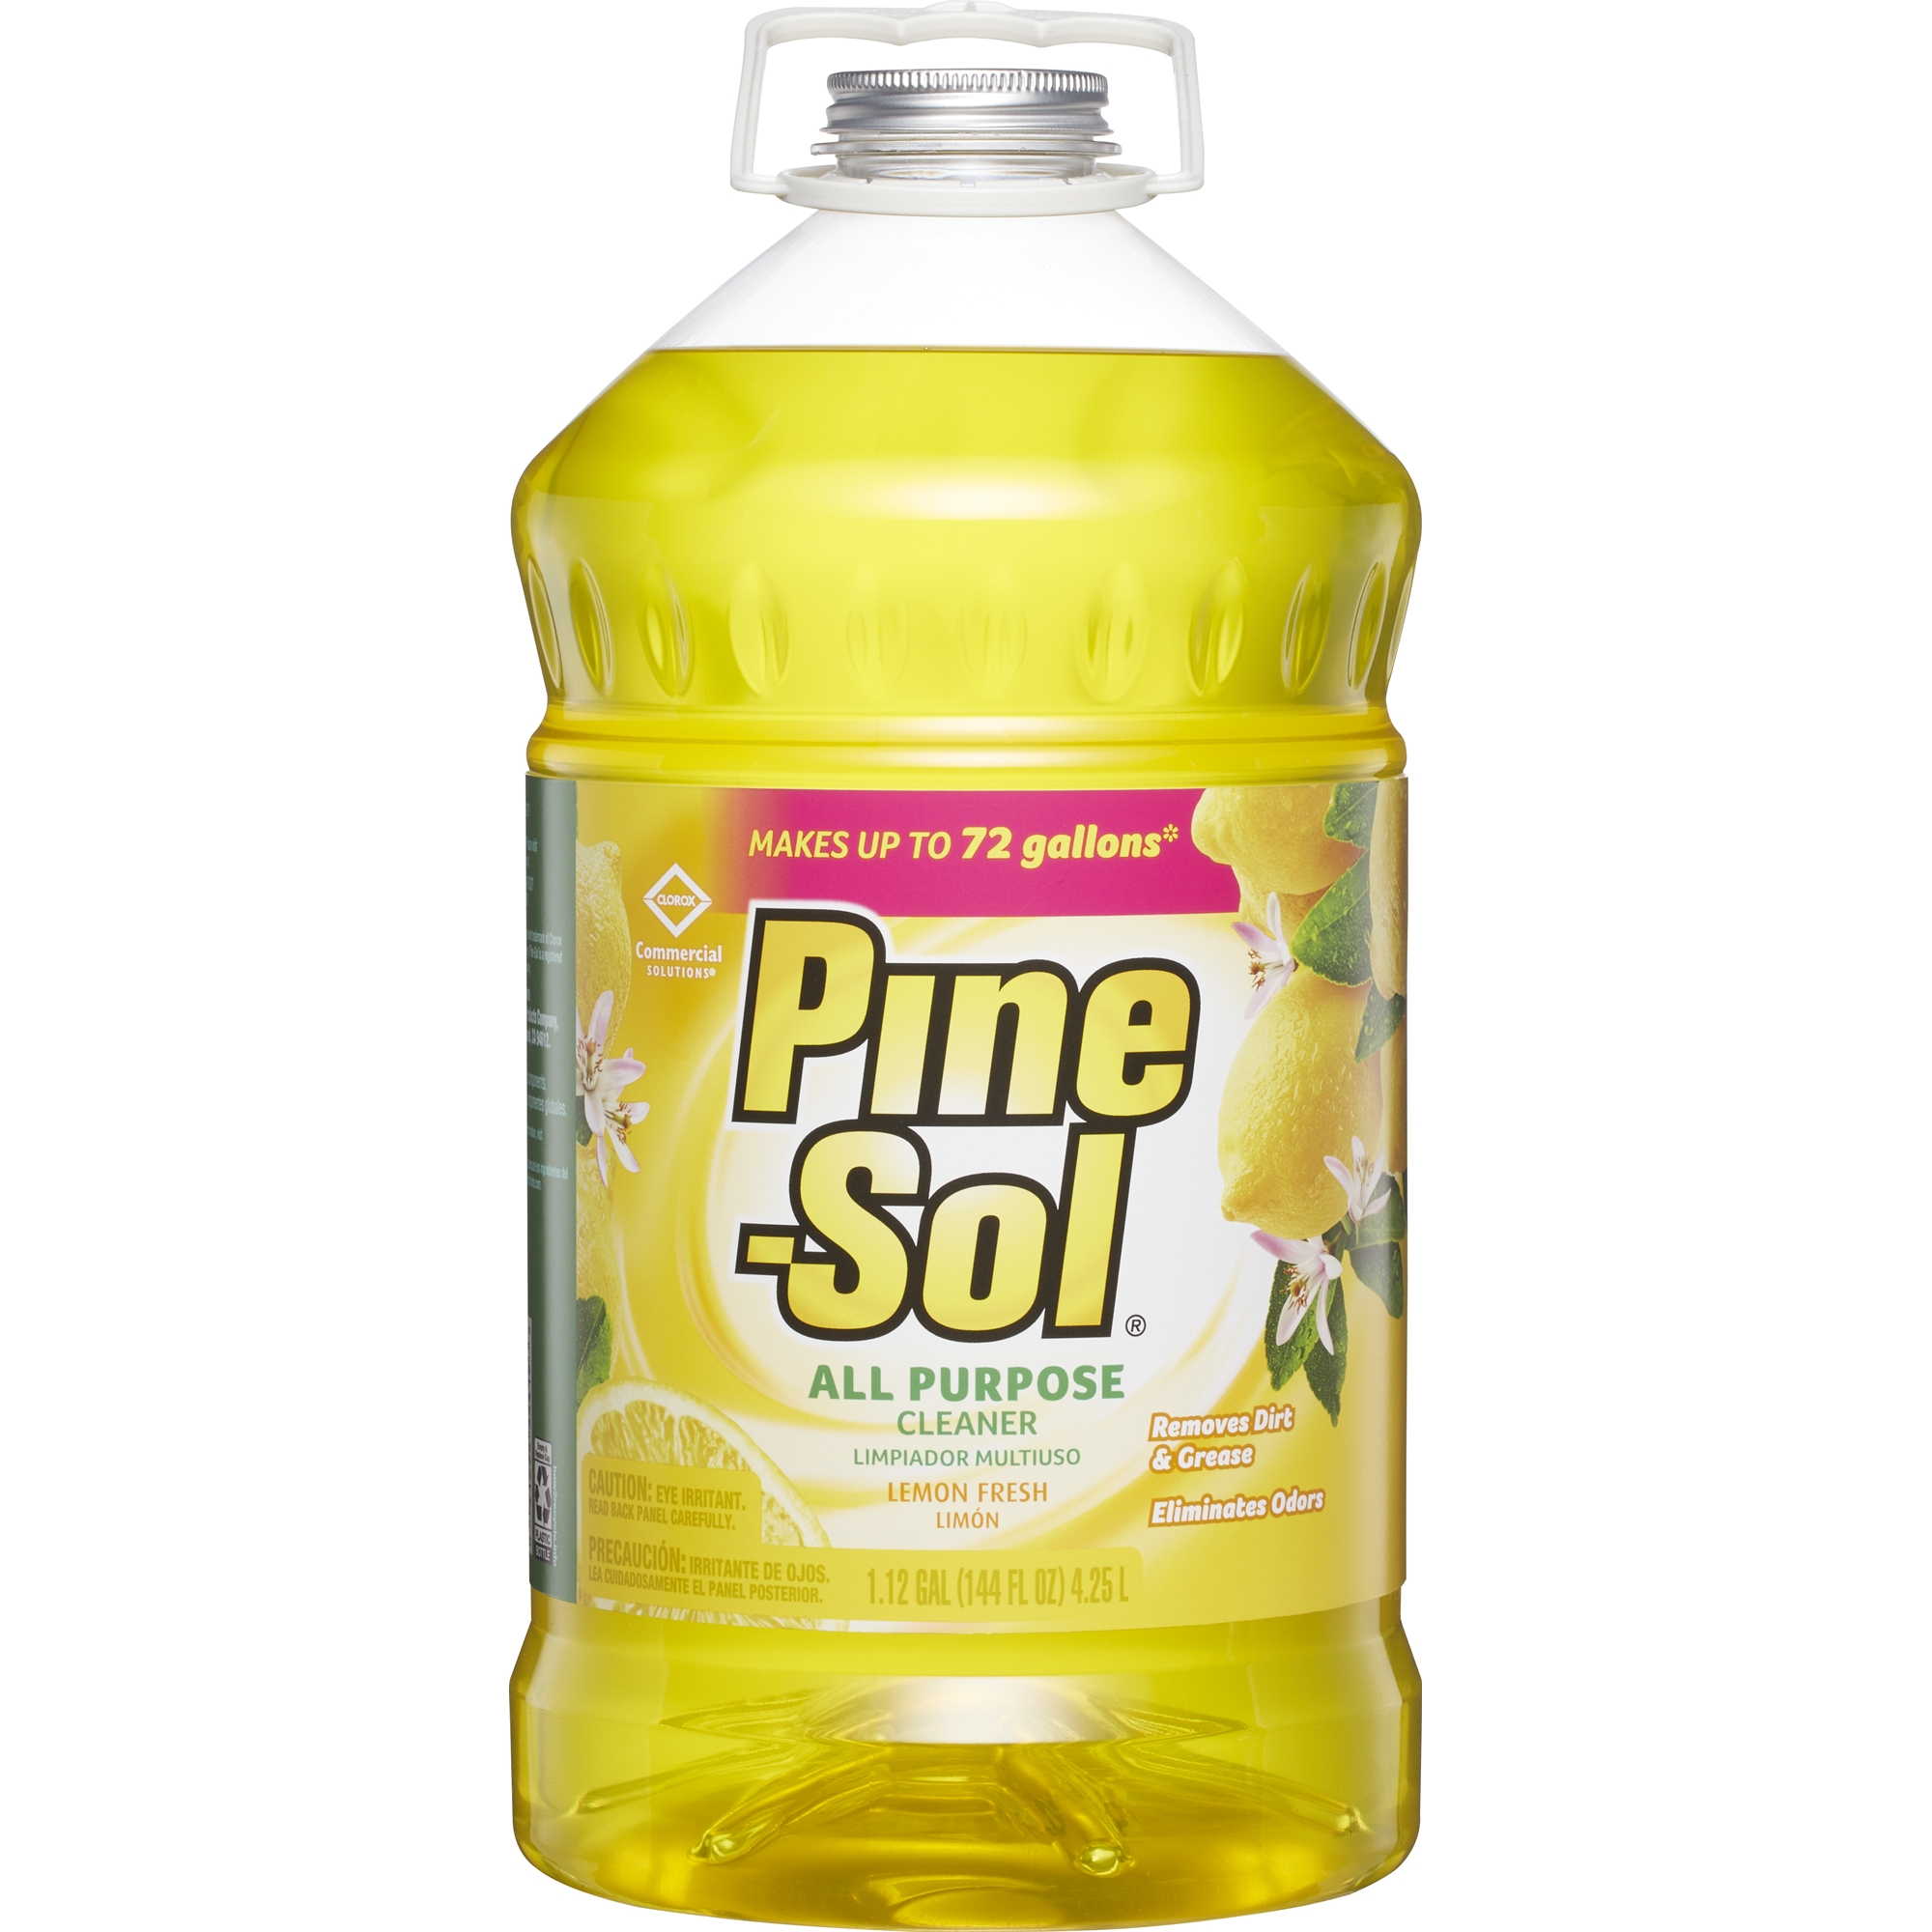 Can You Use Pine Sol On Tile Floors